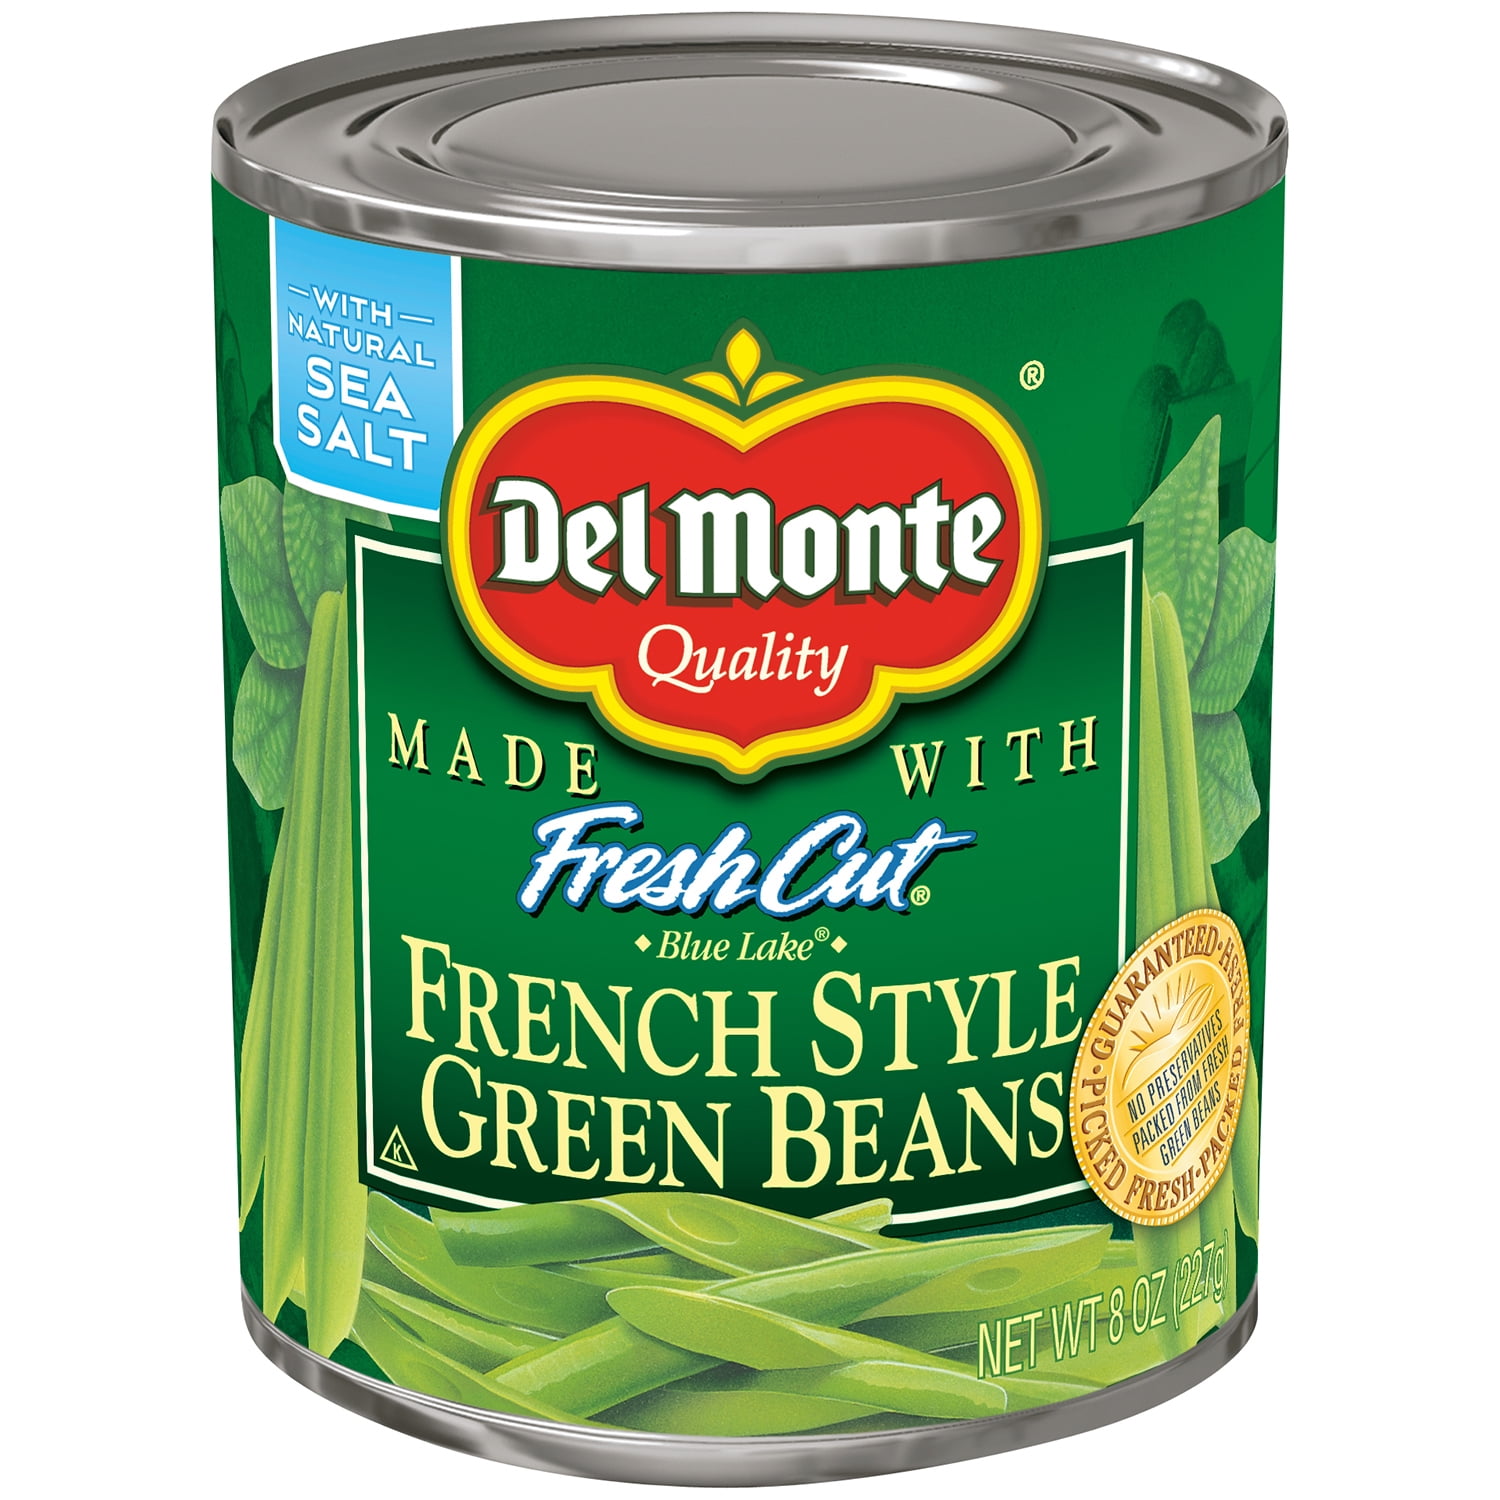 Del Monte French Style Green Beans, Vegetables, 8 oz Can